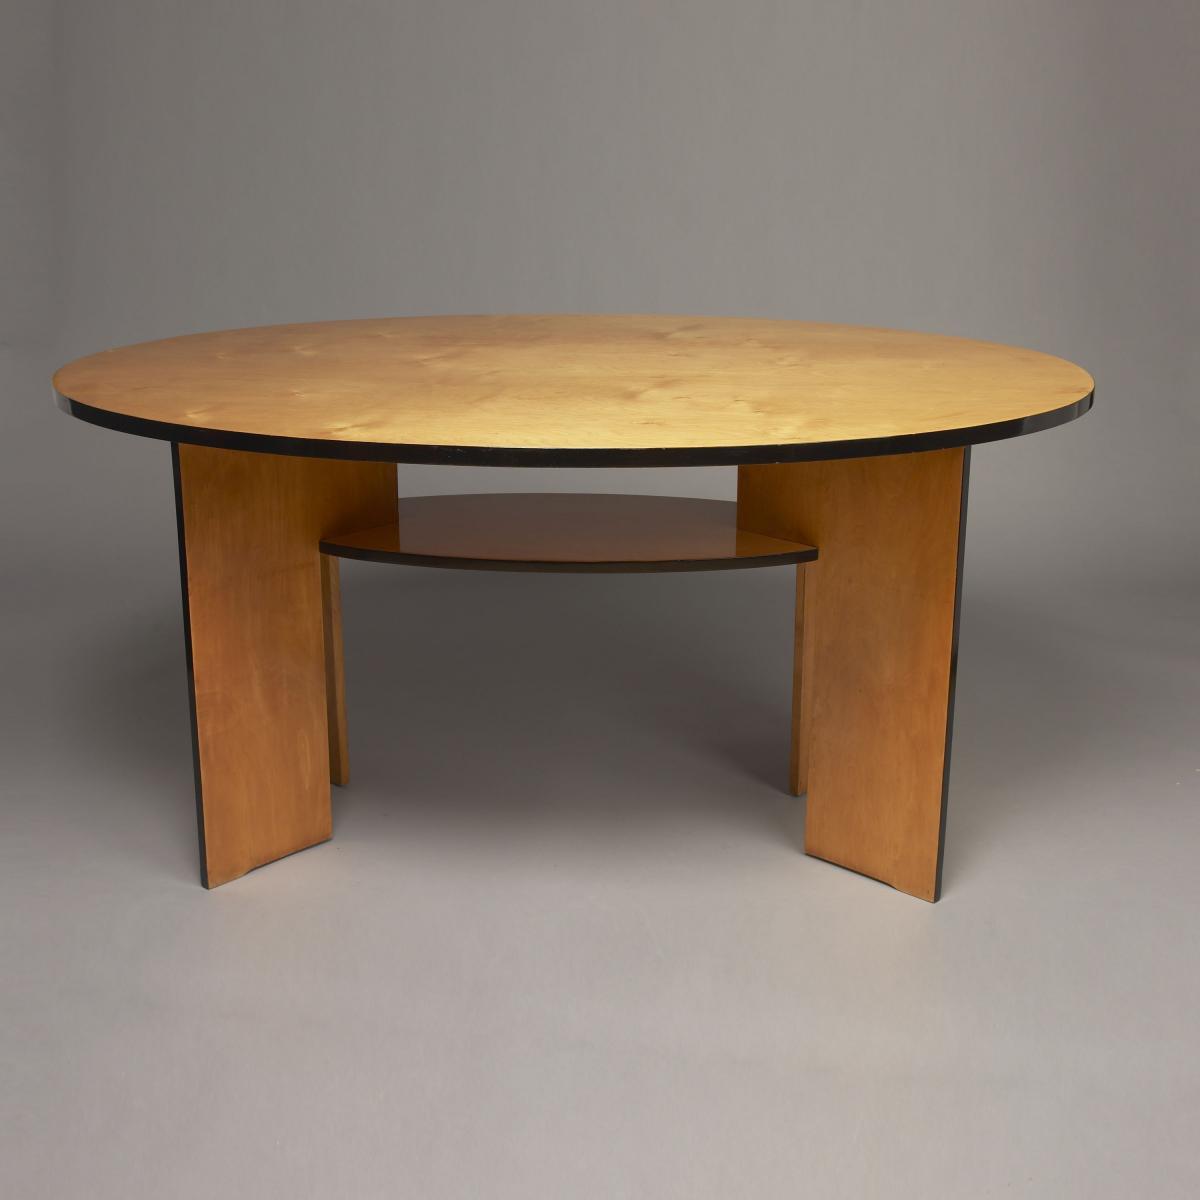 Gerald Summers Dining Table - Made by Makers of Simple Furniture (1931-1940)